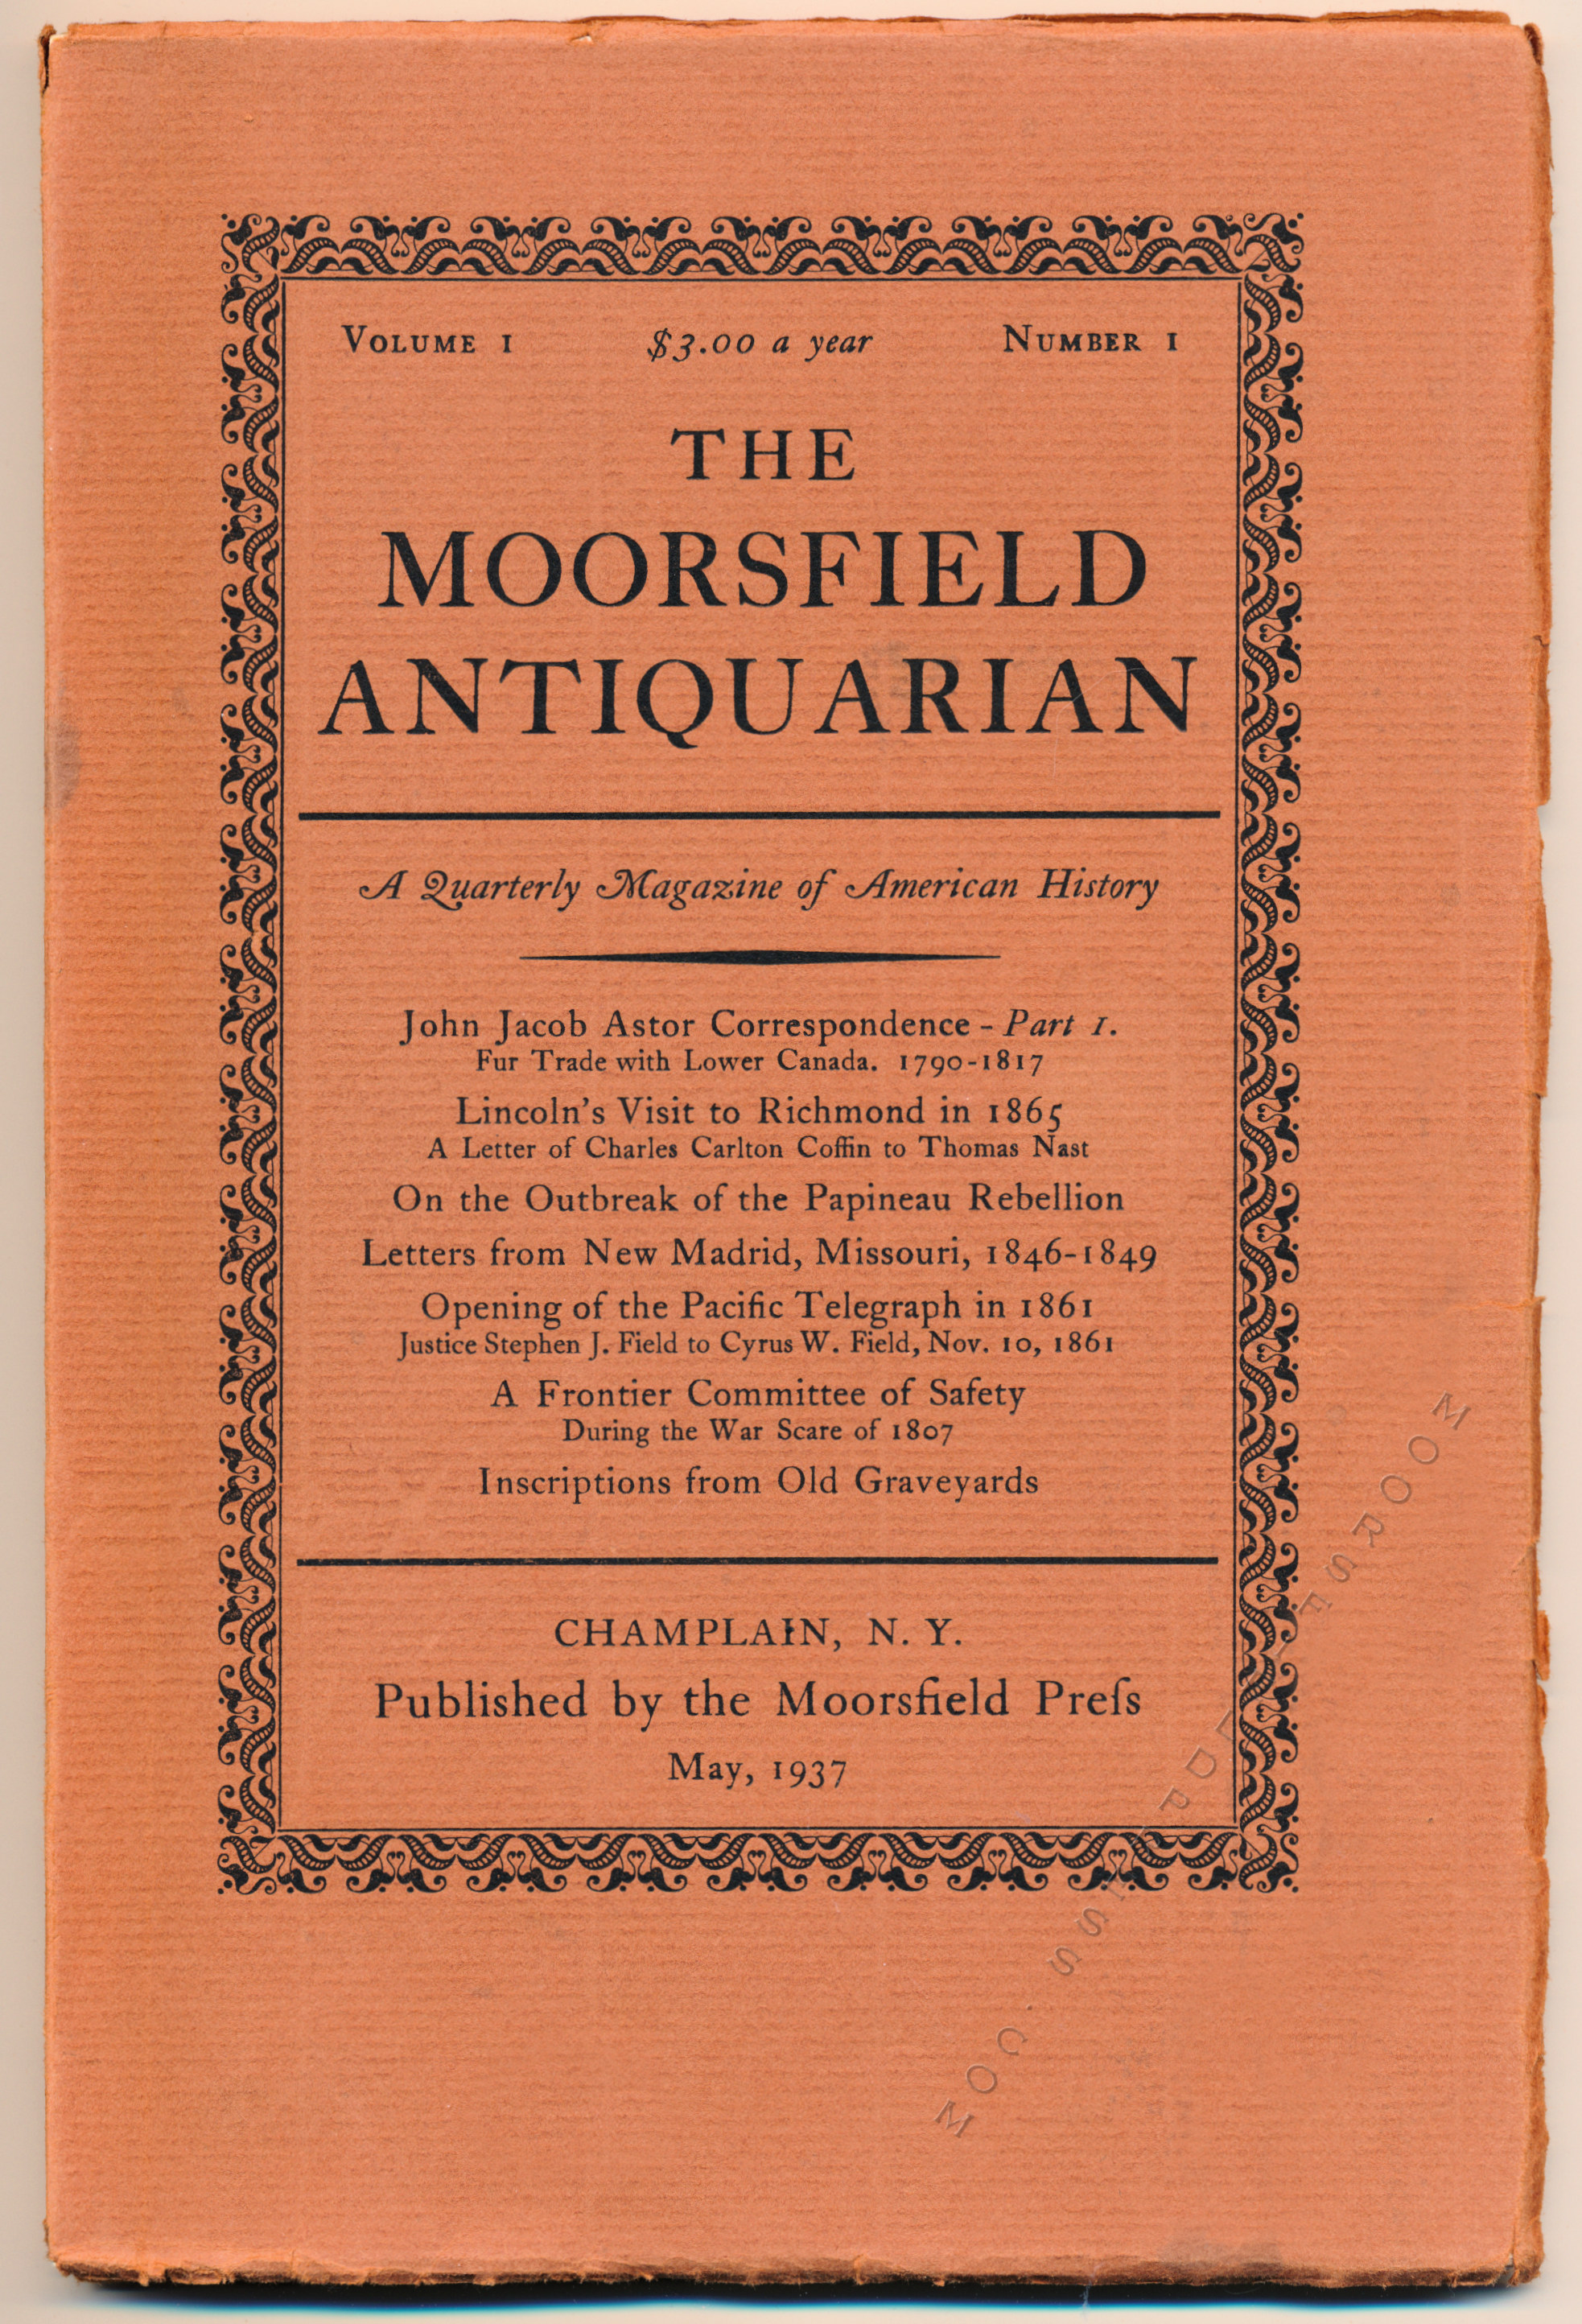 The
                    Moorsfield Antiquarian, Volume 1, Number 1